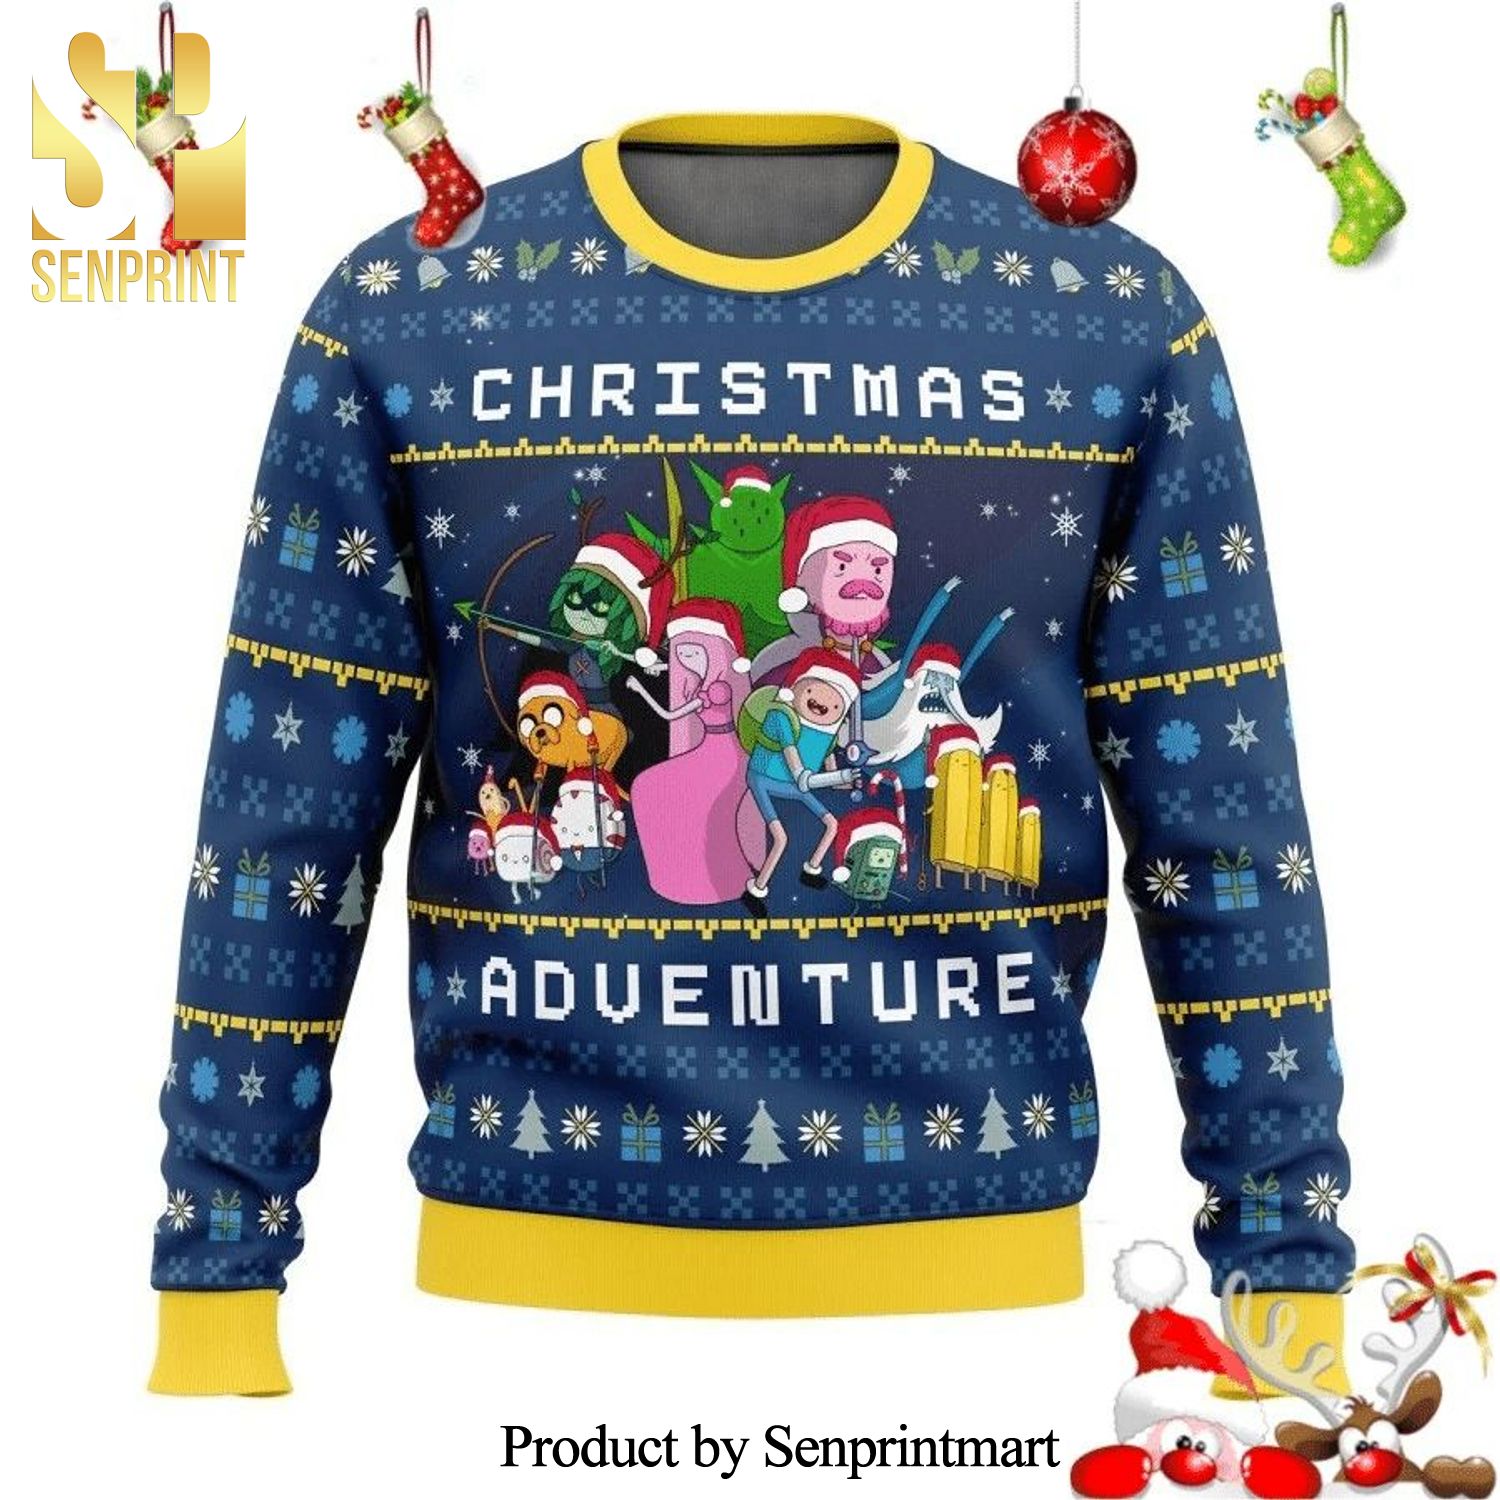 Adventure Time Festive Winter Knitted Ugly Christmas Sweater